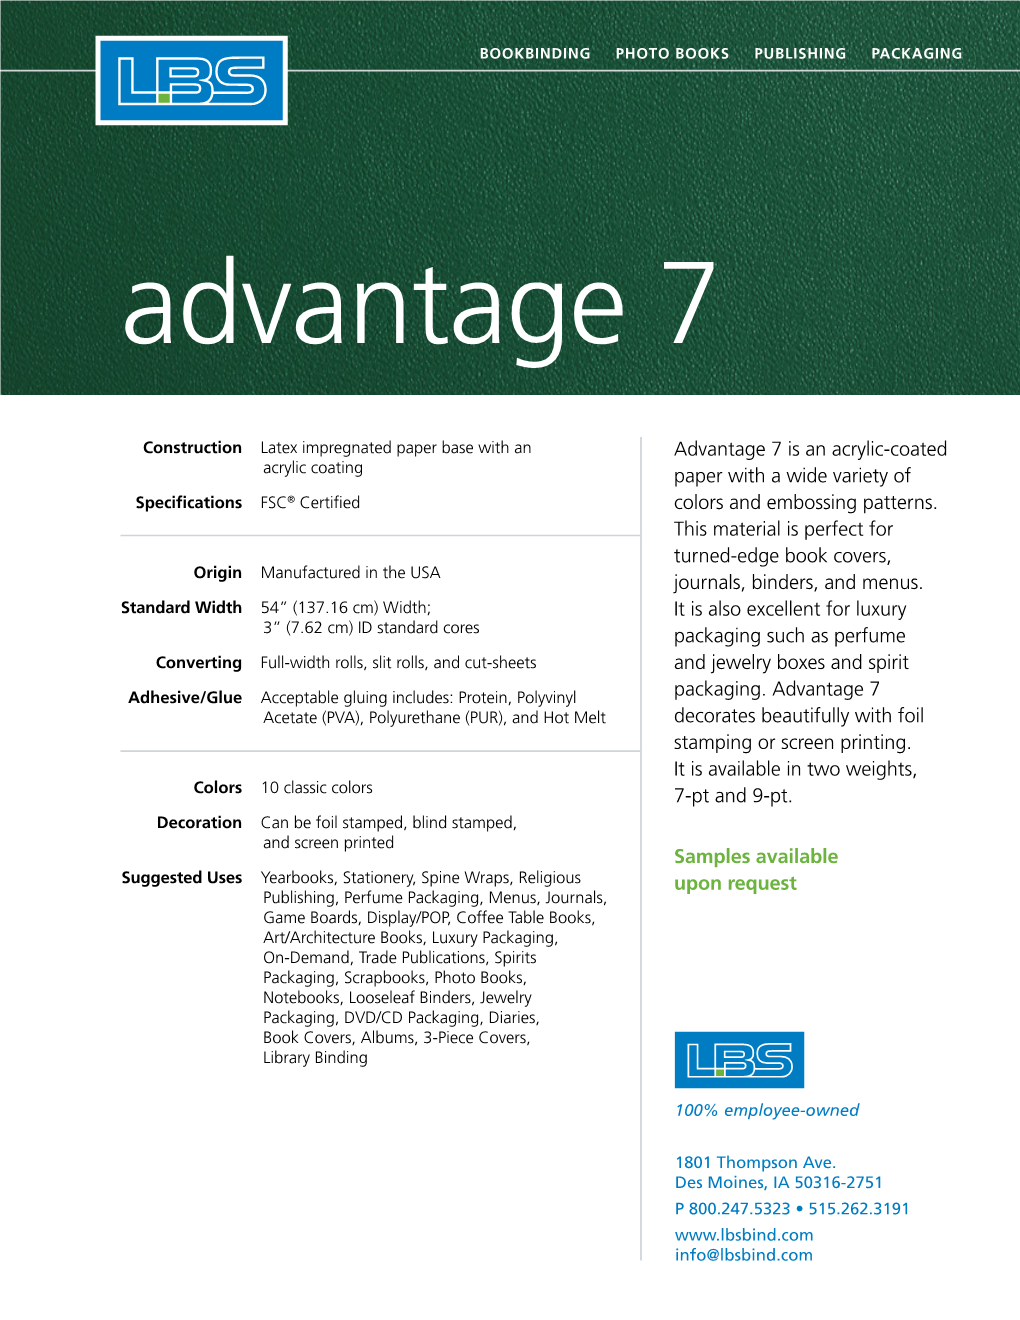 Advantage 7 Is an Acrylic-Coated Paper with a Wide Variety of Colors